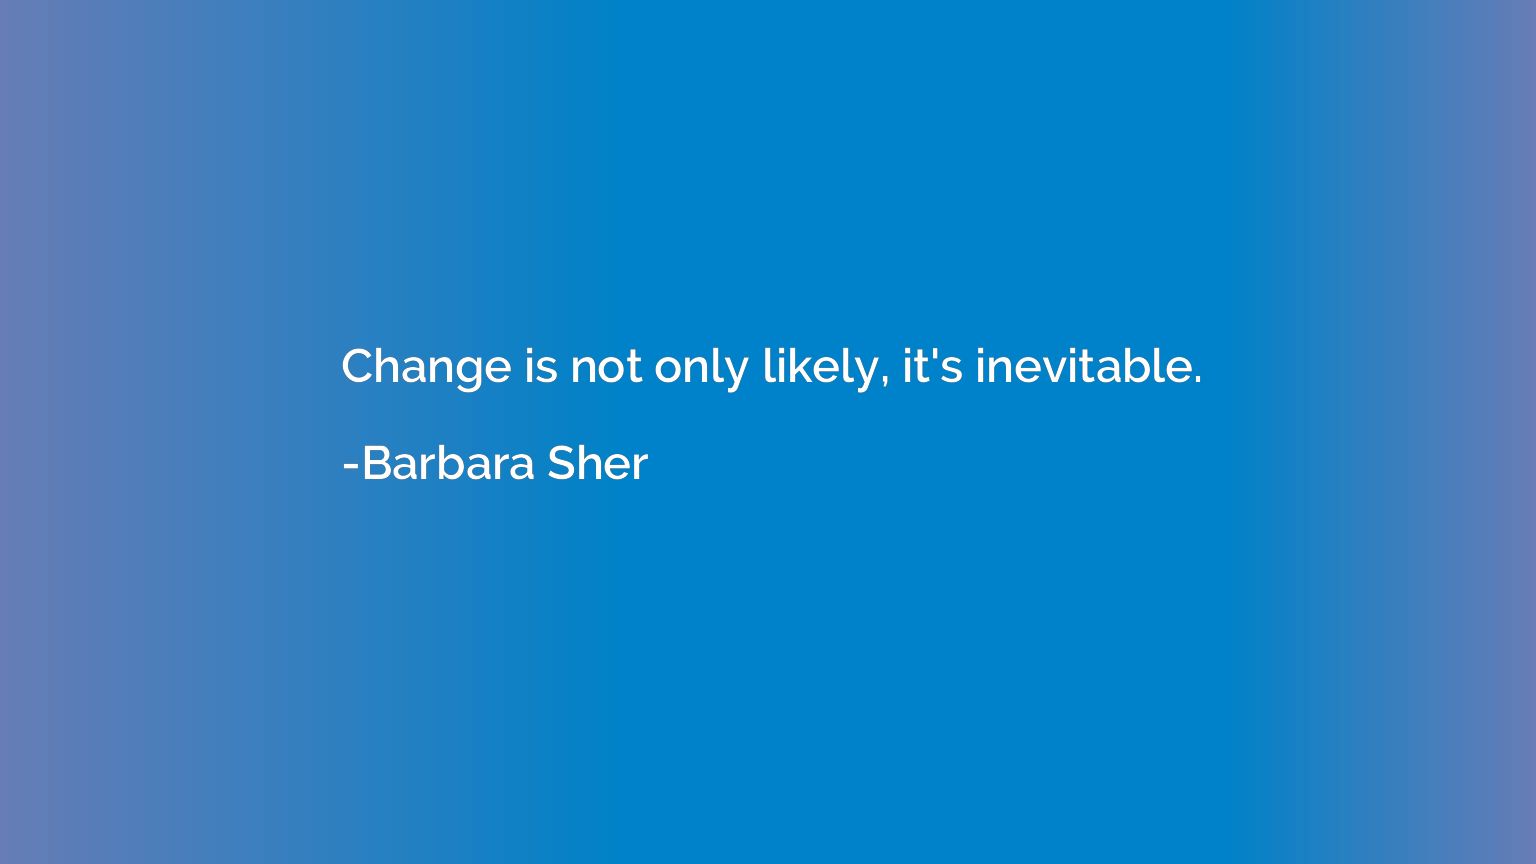 Change is not only likely, it's inevitable.